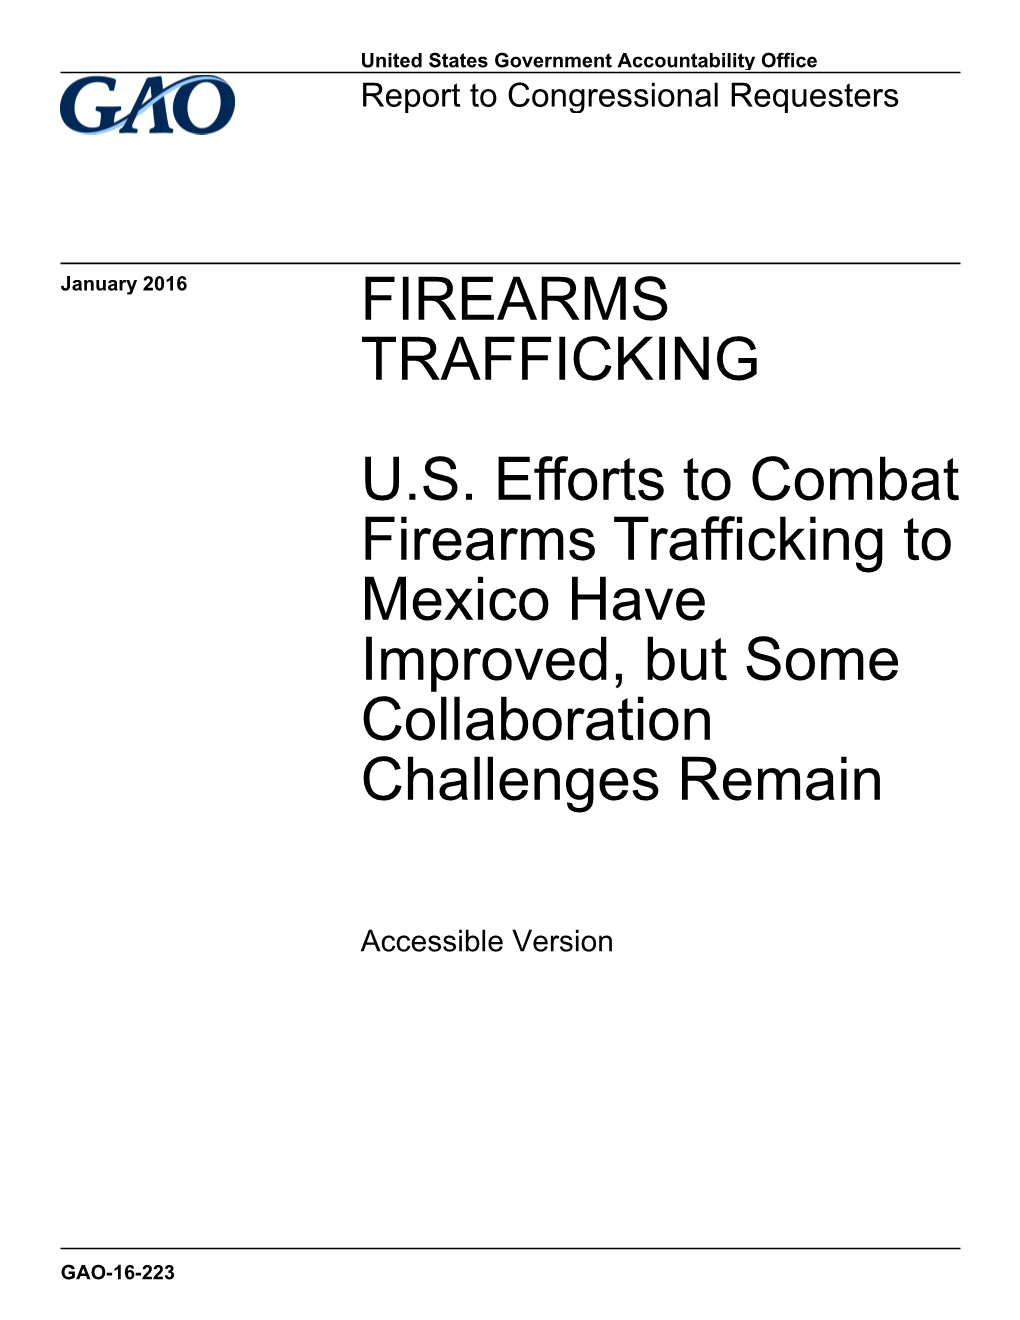 GAO-16-223 Accessible Version, Firearms Trafficking